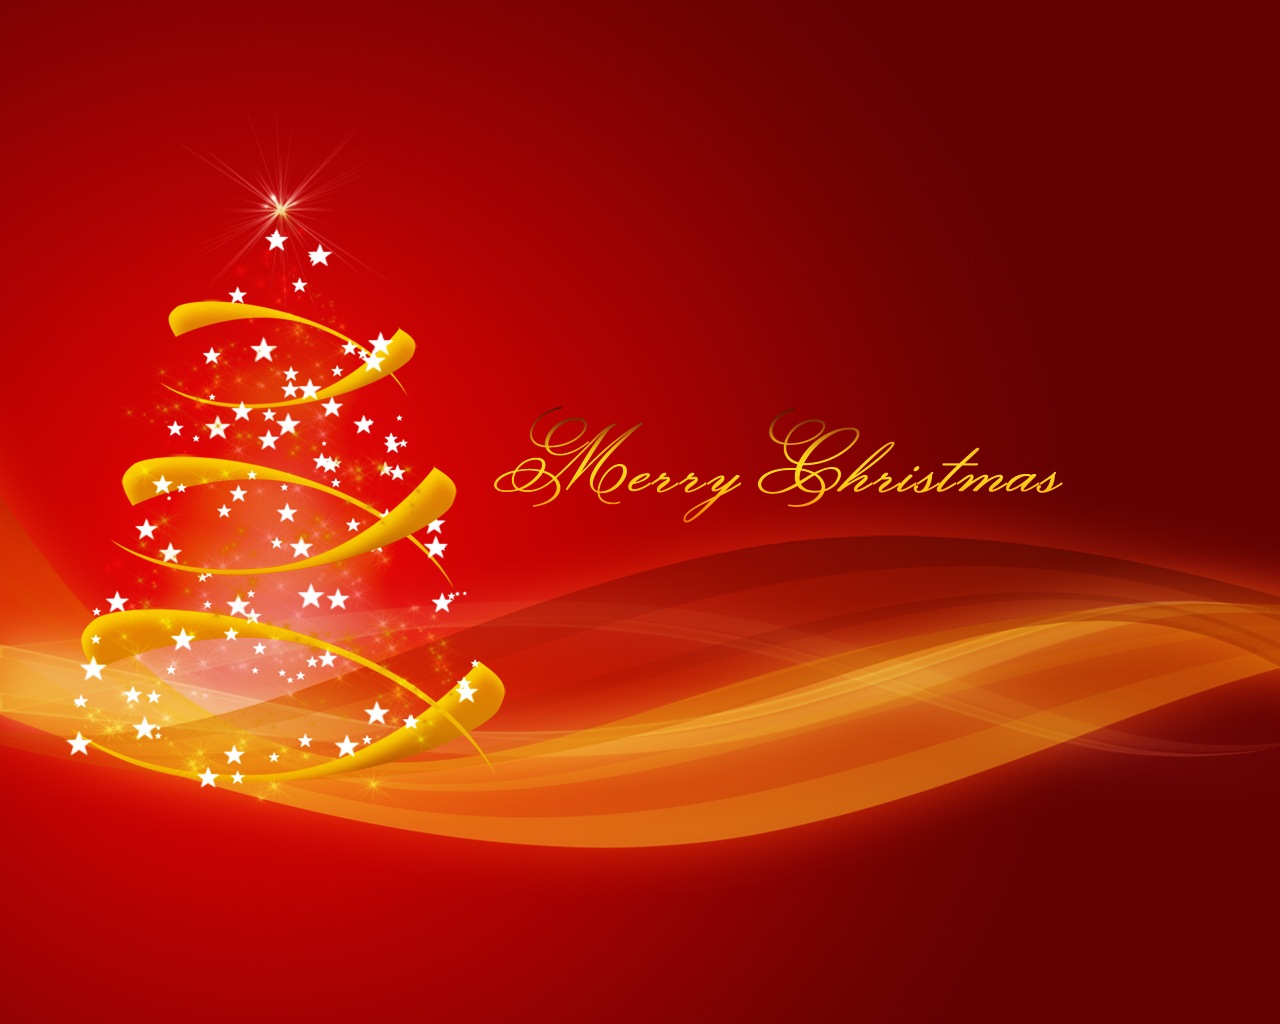 Download wallpapers free Download Christmas 2010 wallpapers